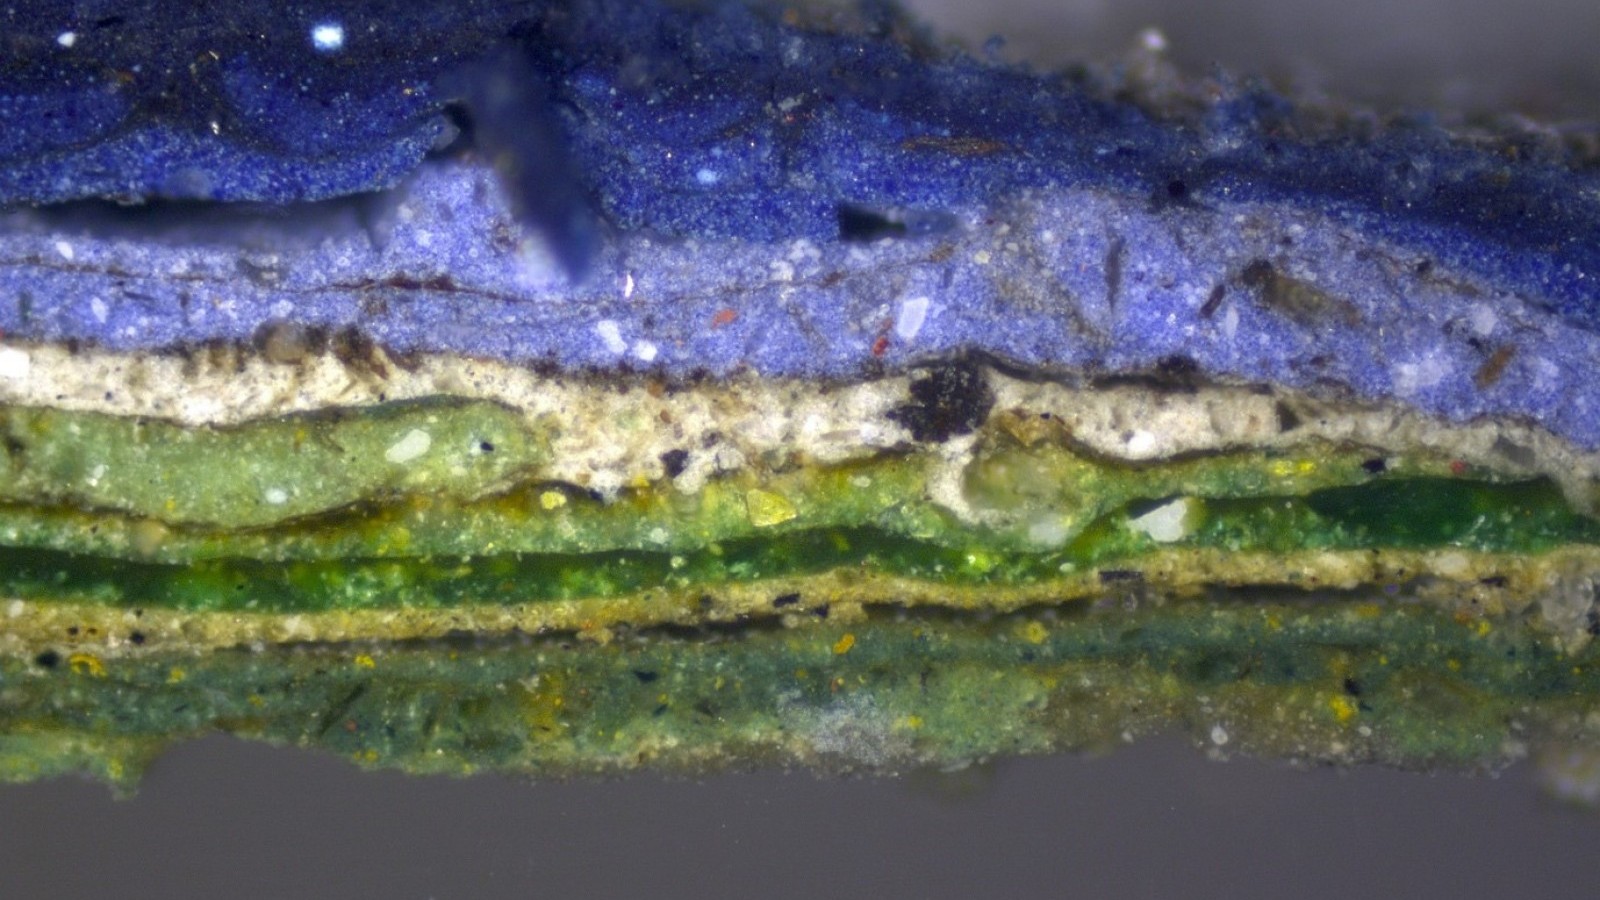 Cross sectional microscope image of the paint layers inside the boat